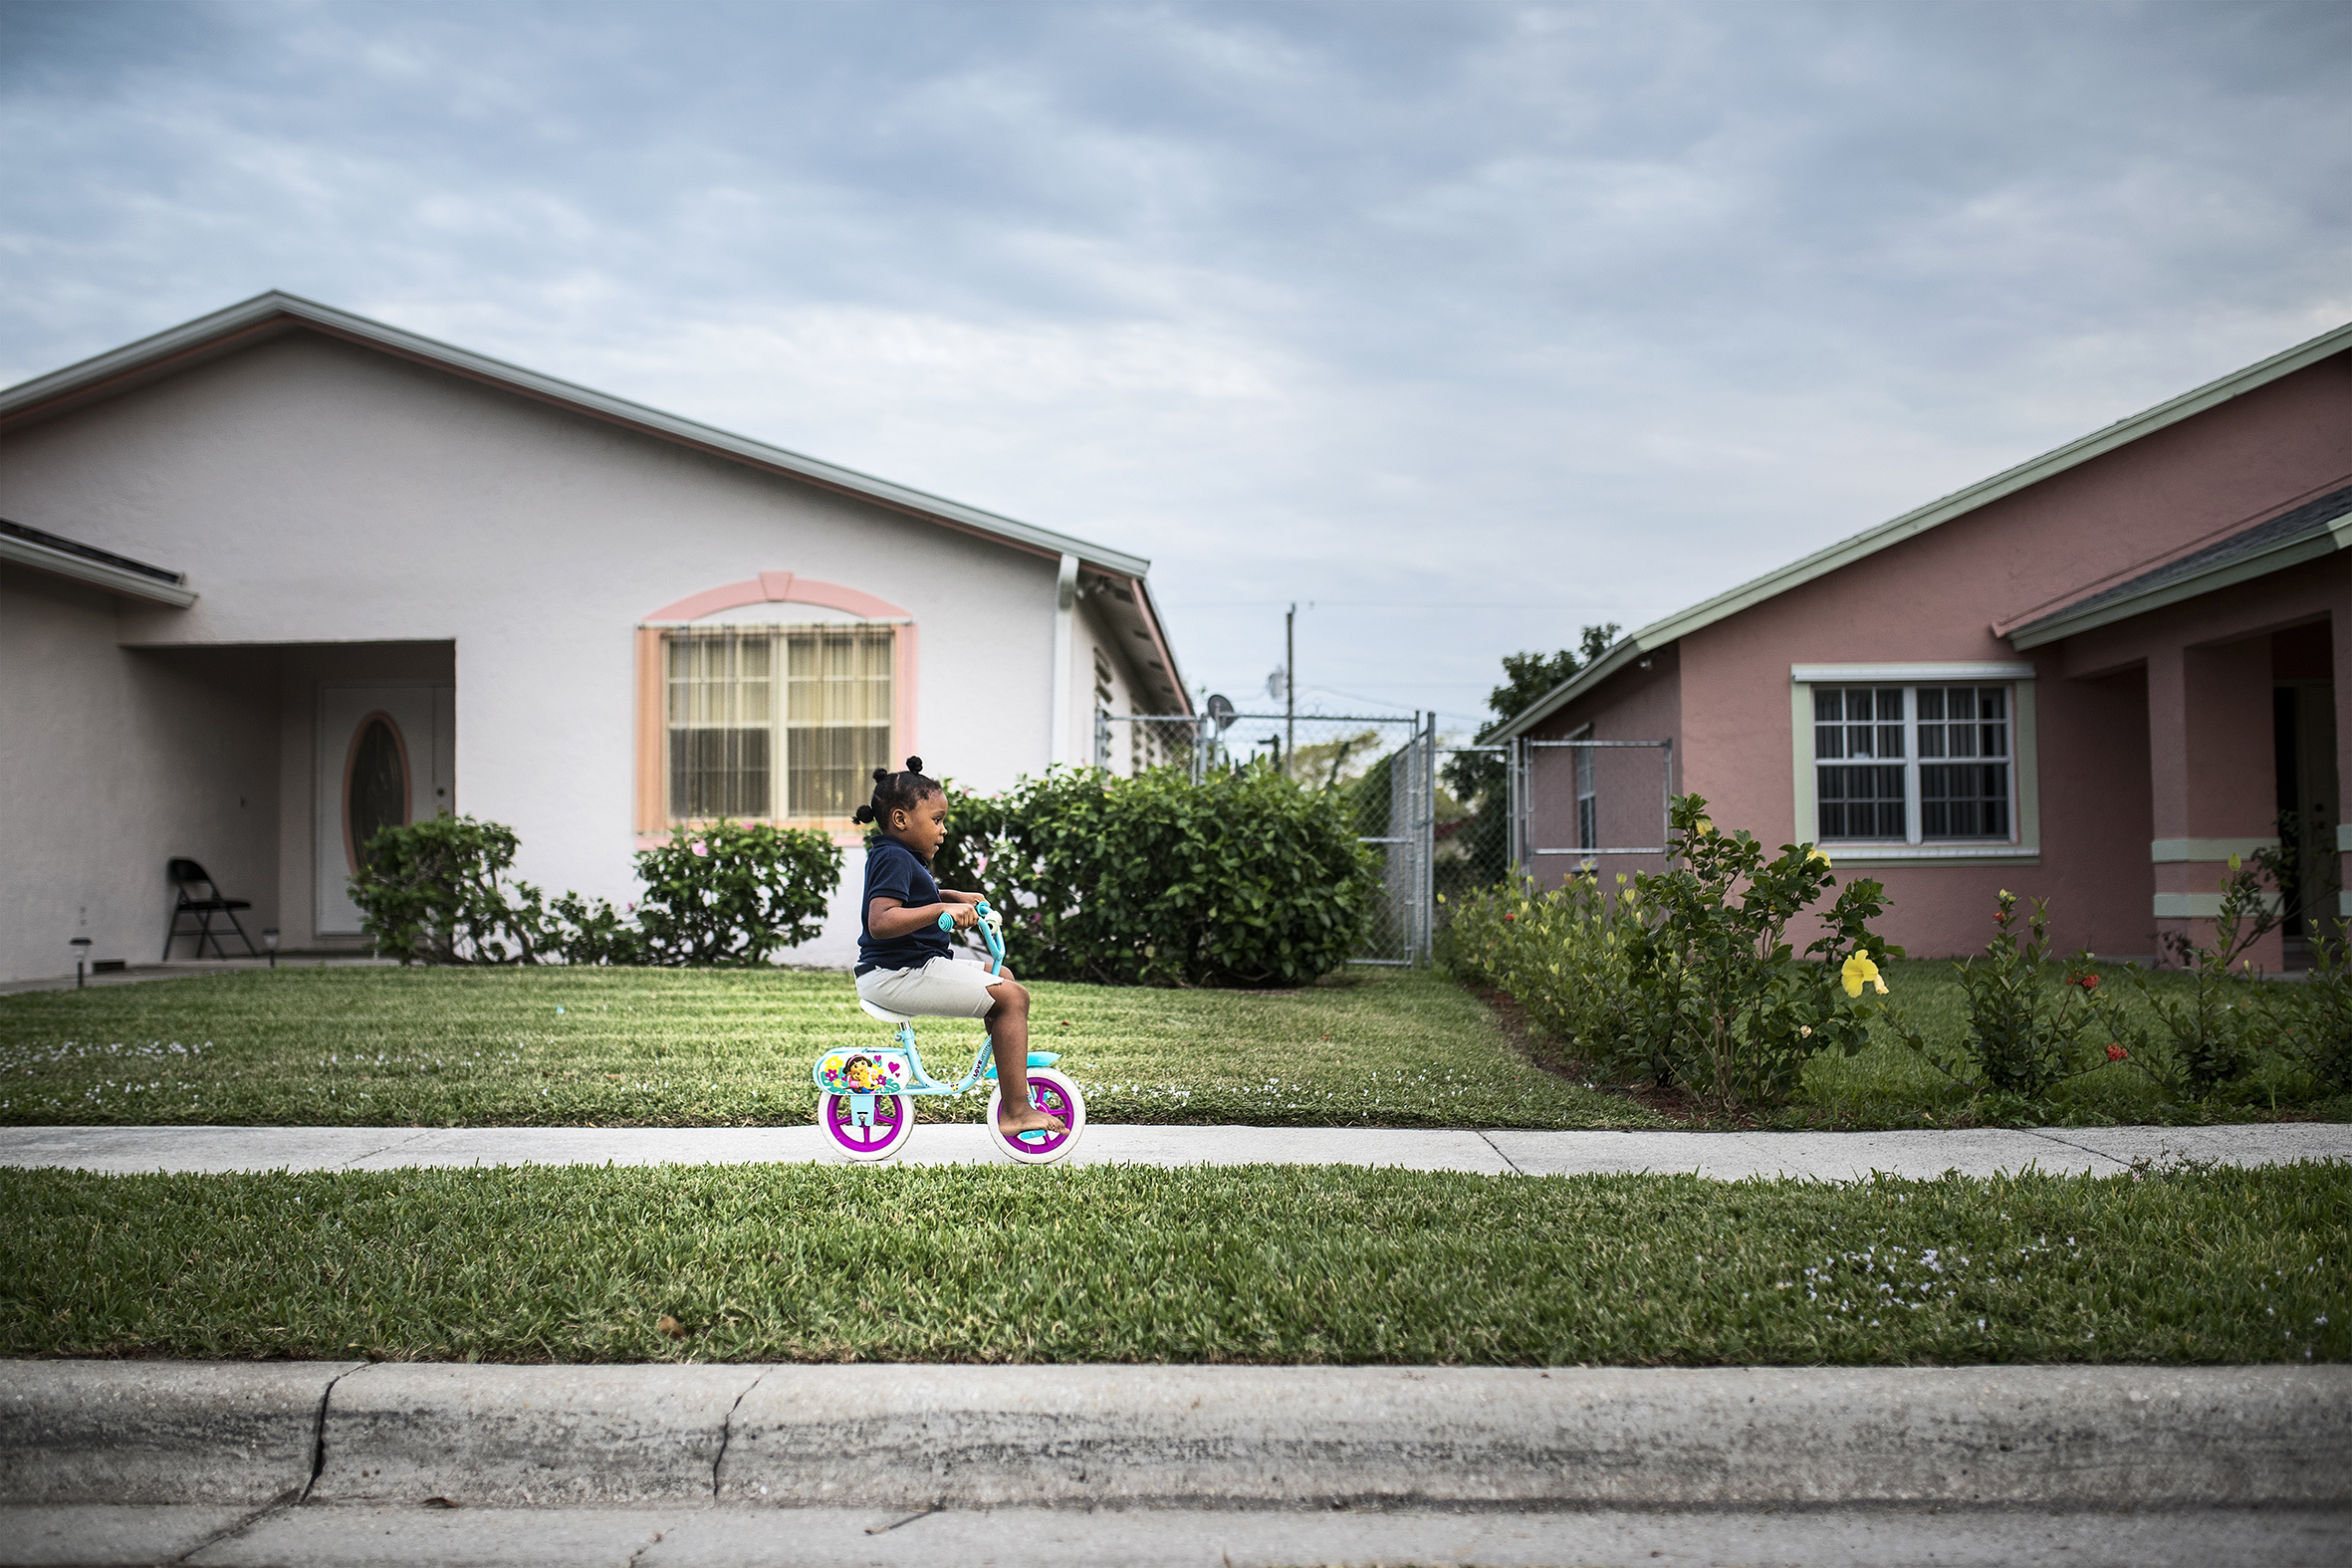  34.000 inhabitants lives in Riviera Beach. 66 percent of people in the city are black, and 25 percent live below the poverty line. 